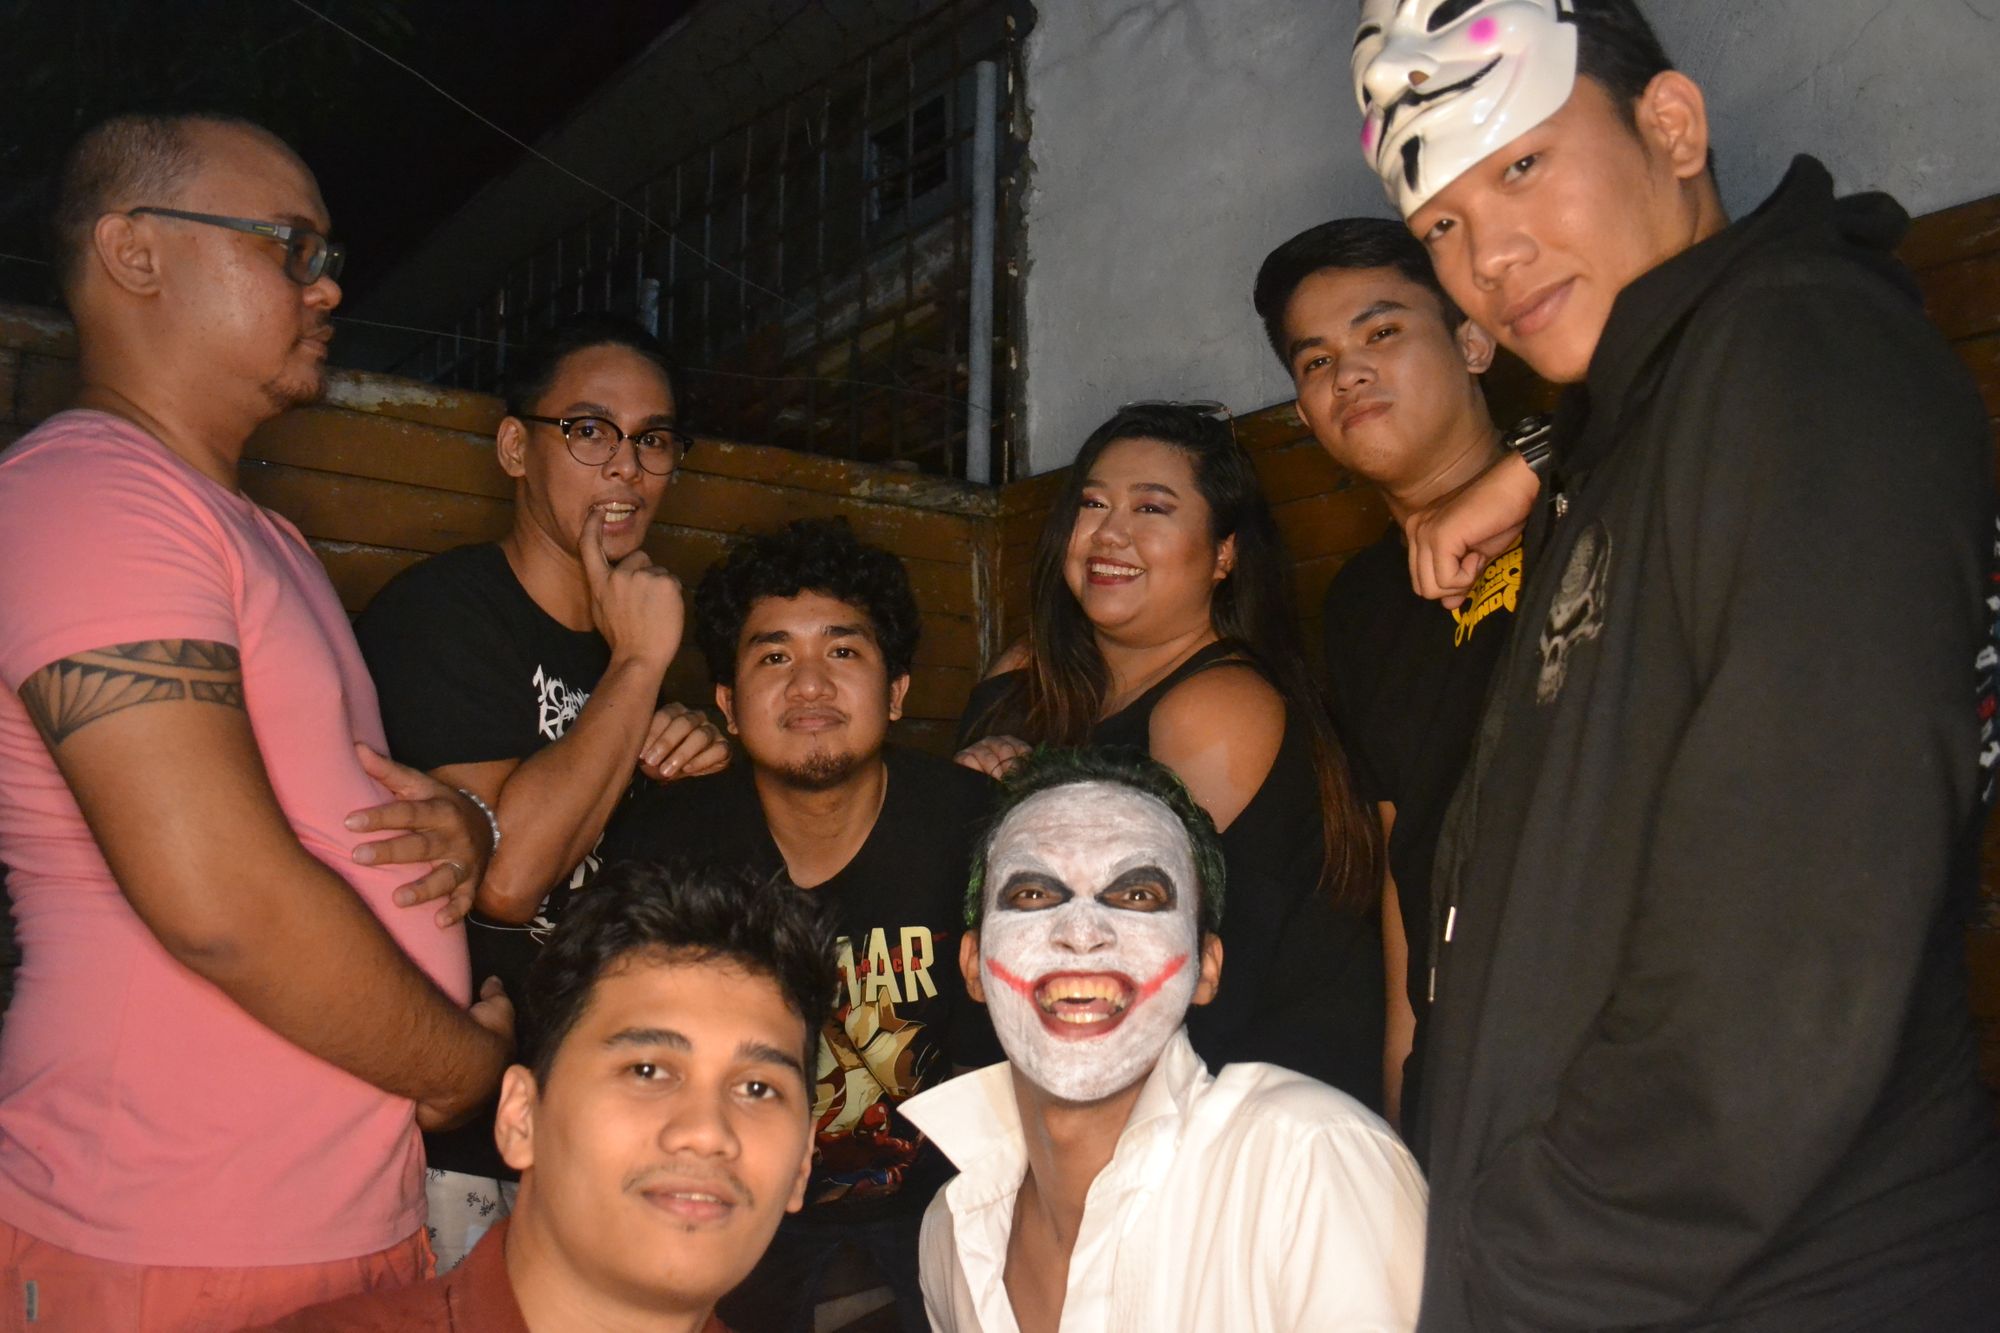 Pragtech Throws Its First Ever Office Halloween Party